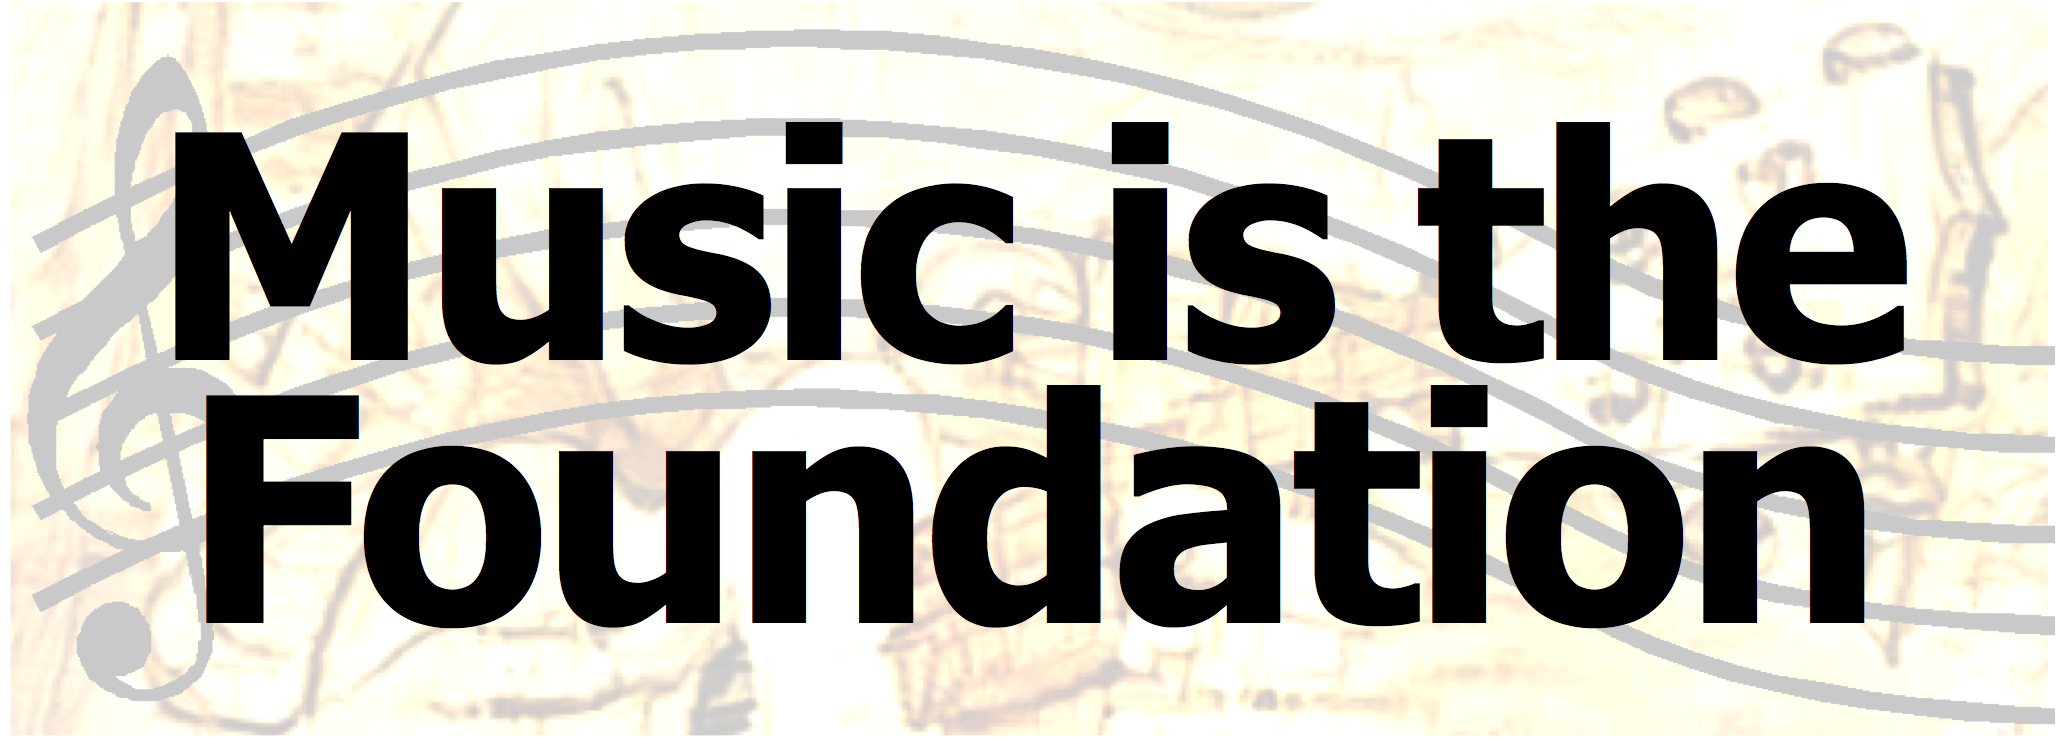 Music is the Foundation logo